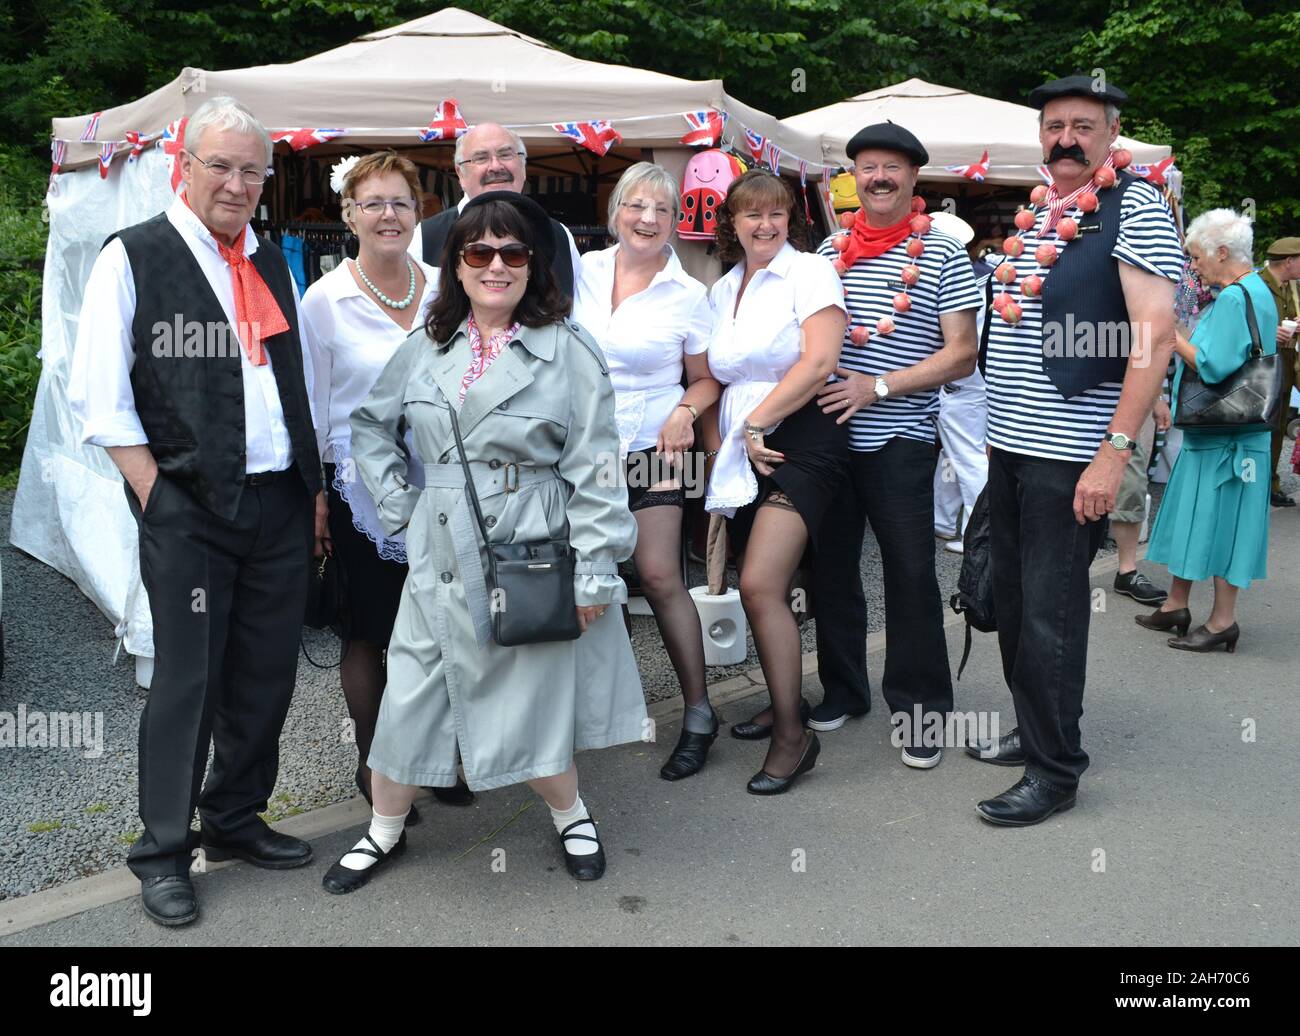 People dressed as 'Allo 'Allo characters, during a 1940s weekend, on the Severn Valley Railway, Shropshire, UK Stock Photo